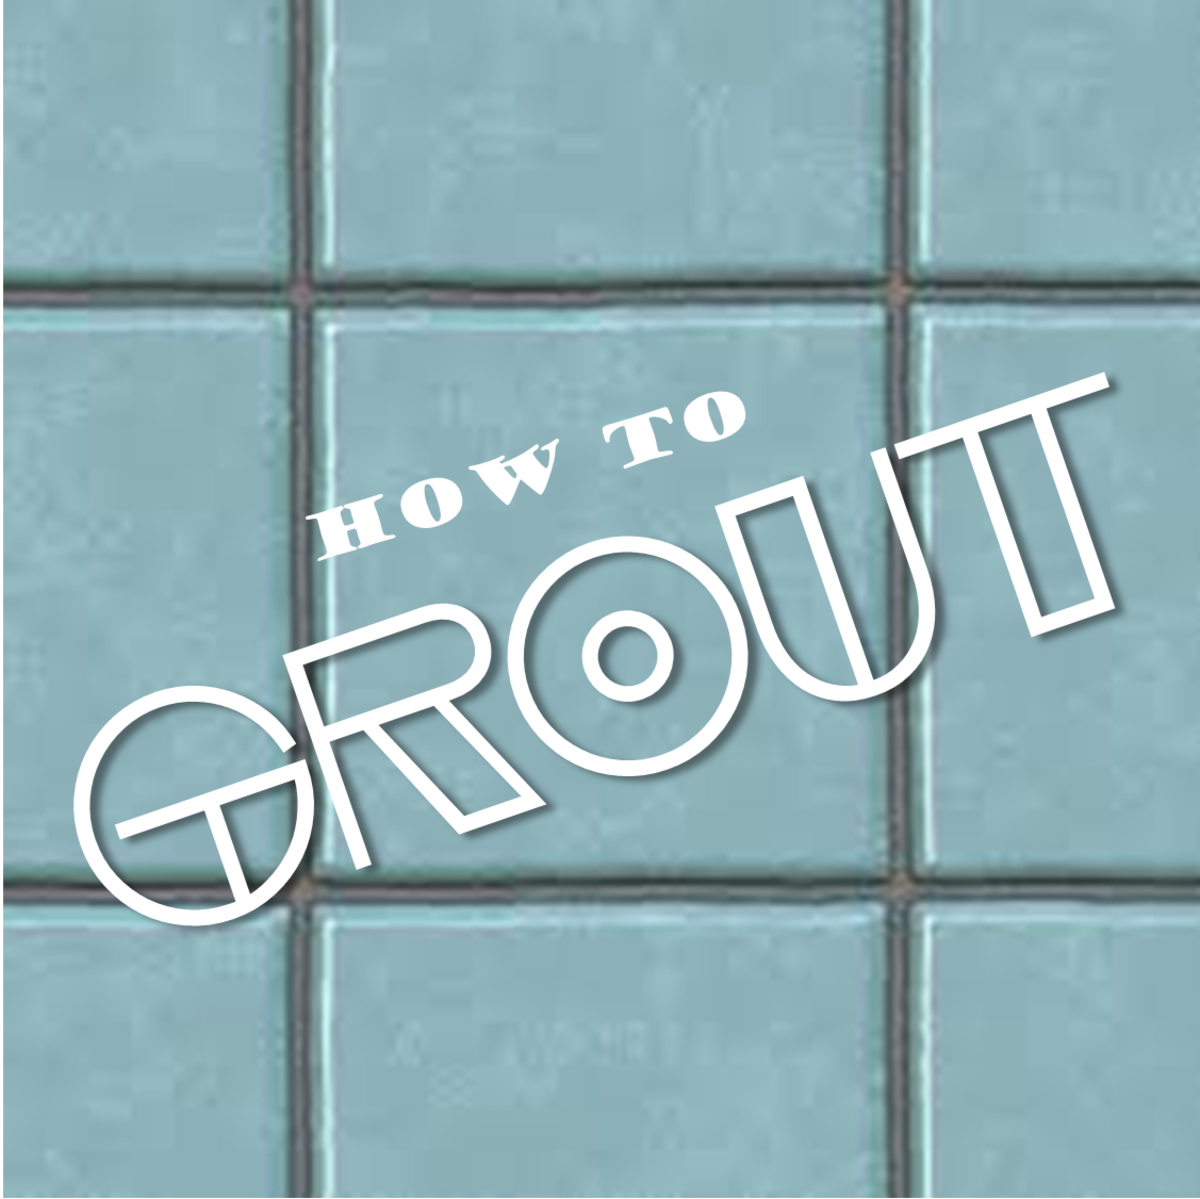 How to Apply Ceramic Tile Grout (Do-It-Yourself)